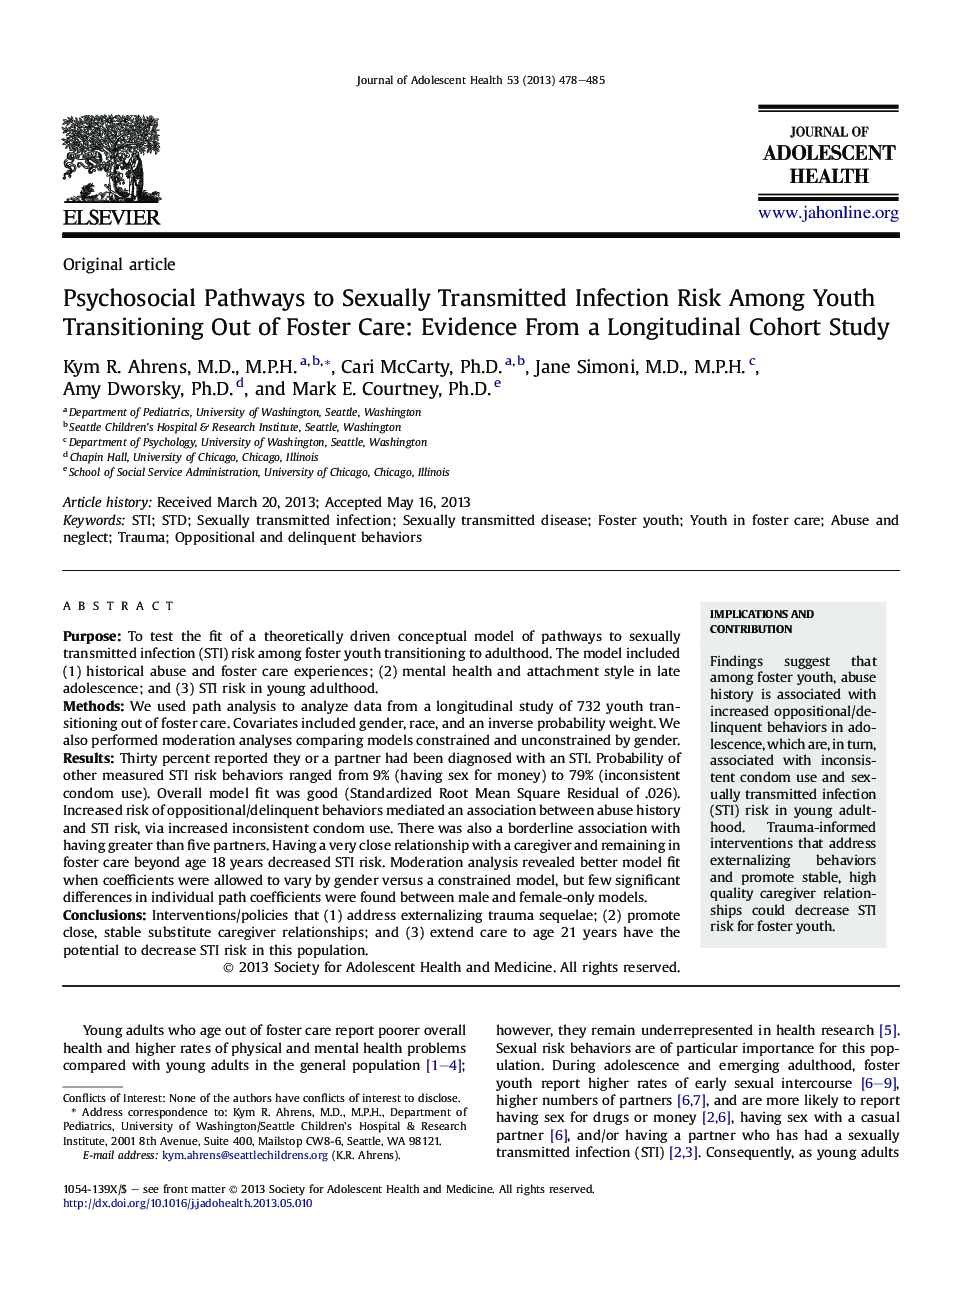 Psychosocial Pathways to Sexually Transmitted Infection Risk Among Youth Transitioning Out of Foster Care: Evidence From a Longitudinal Cohort Study 